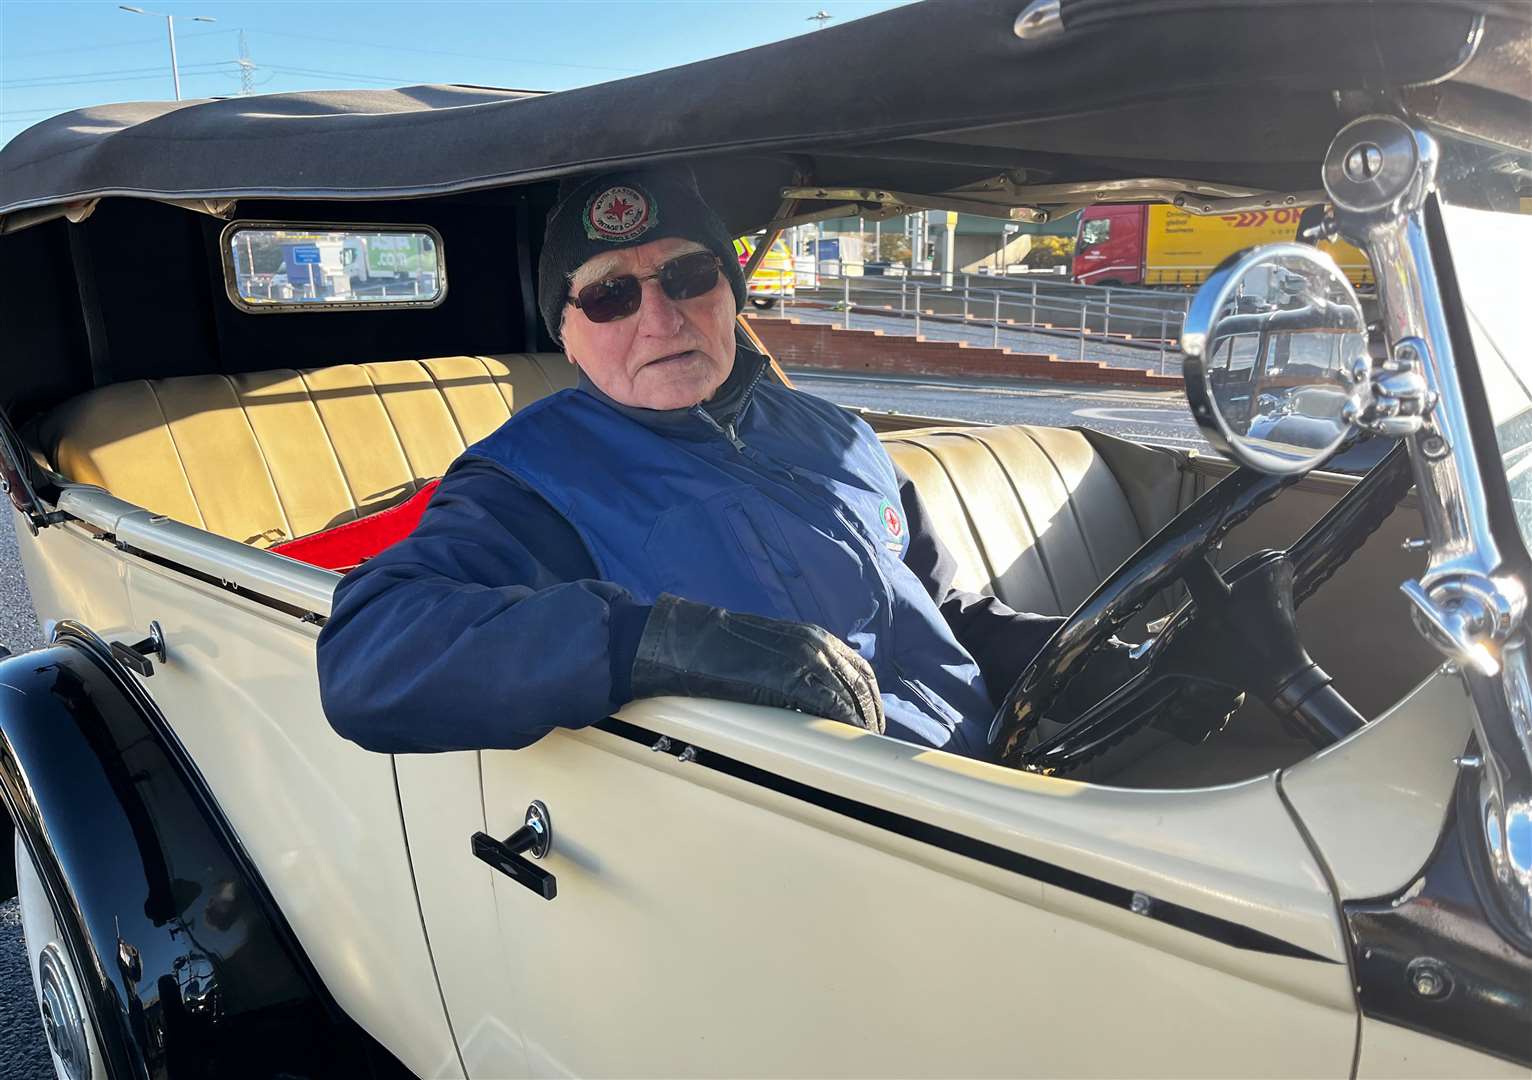 While his father Peter White, 88, drove his 1930s Buick in the parade